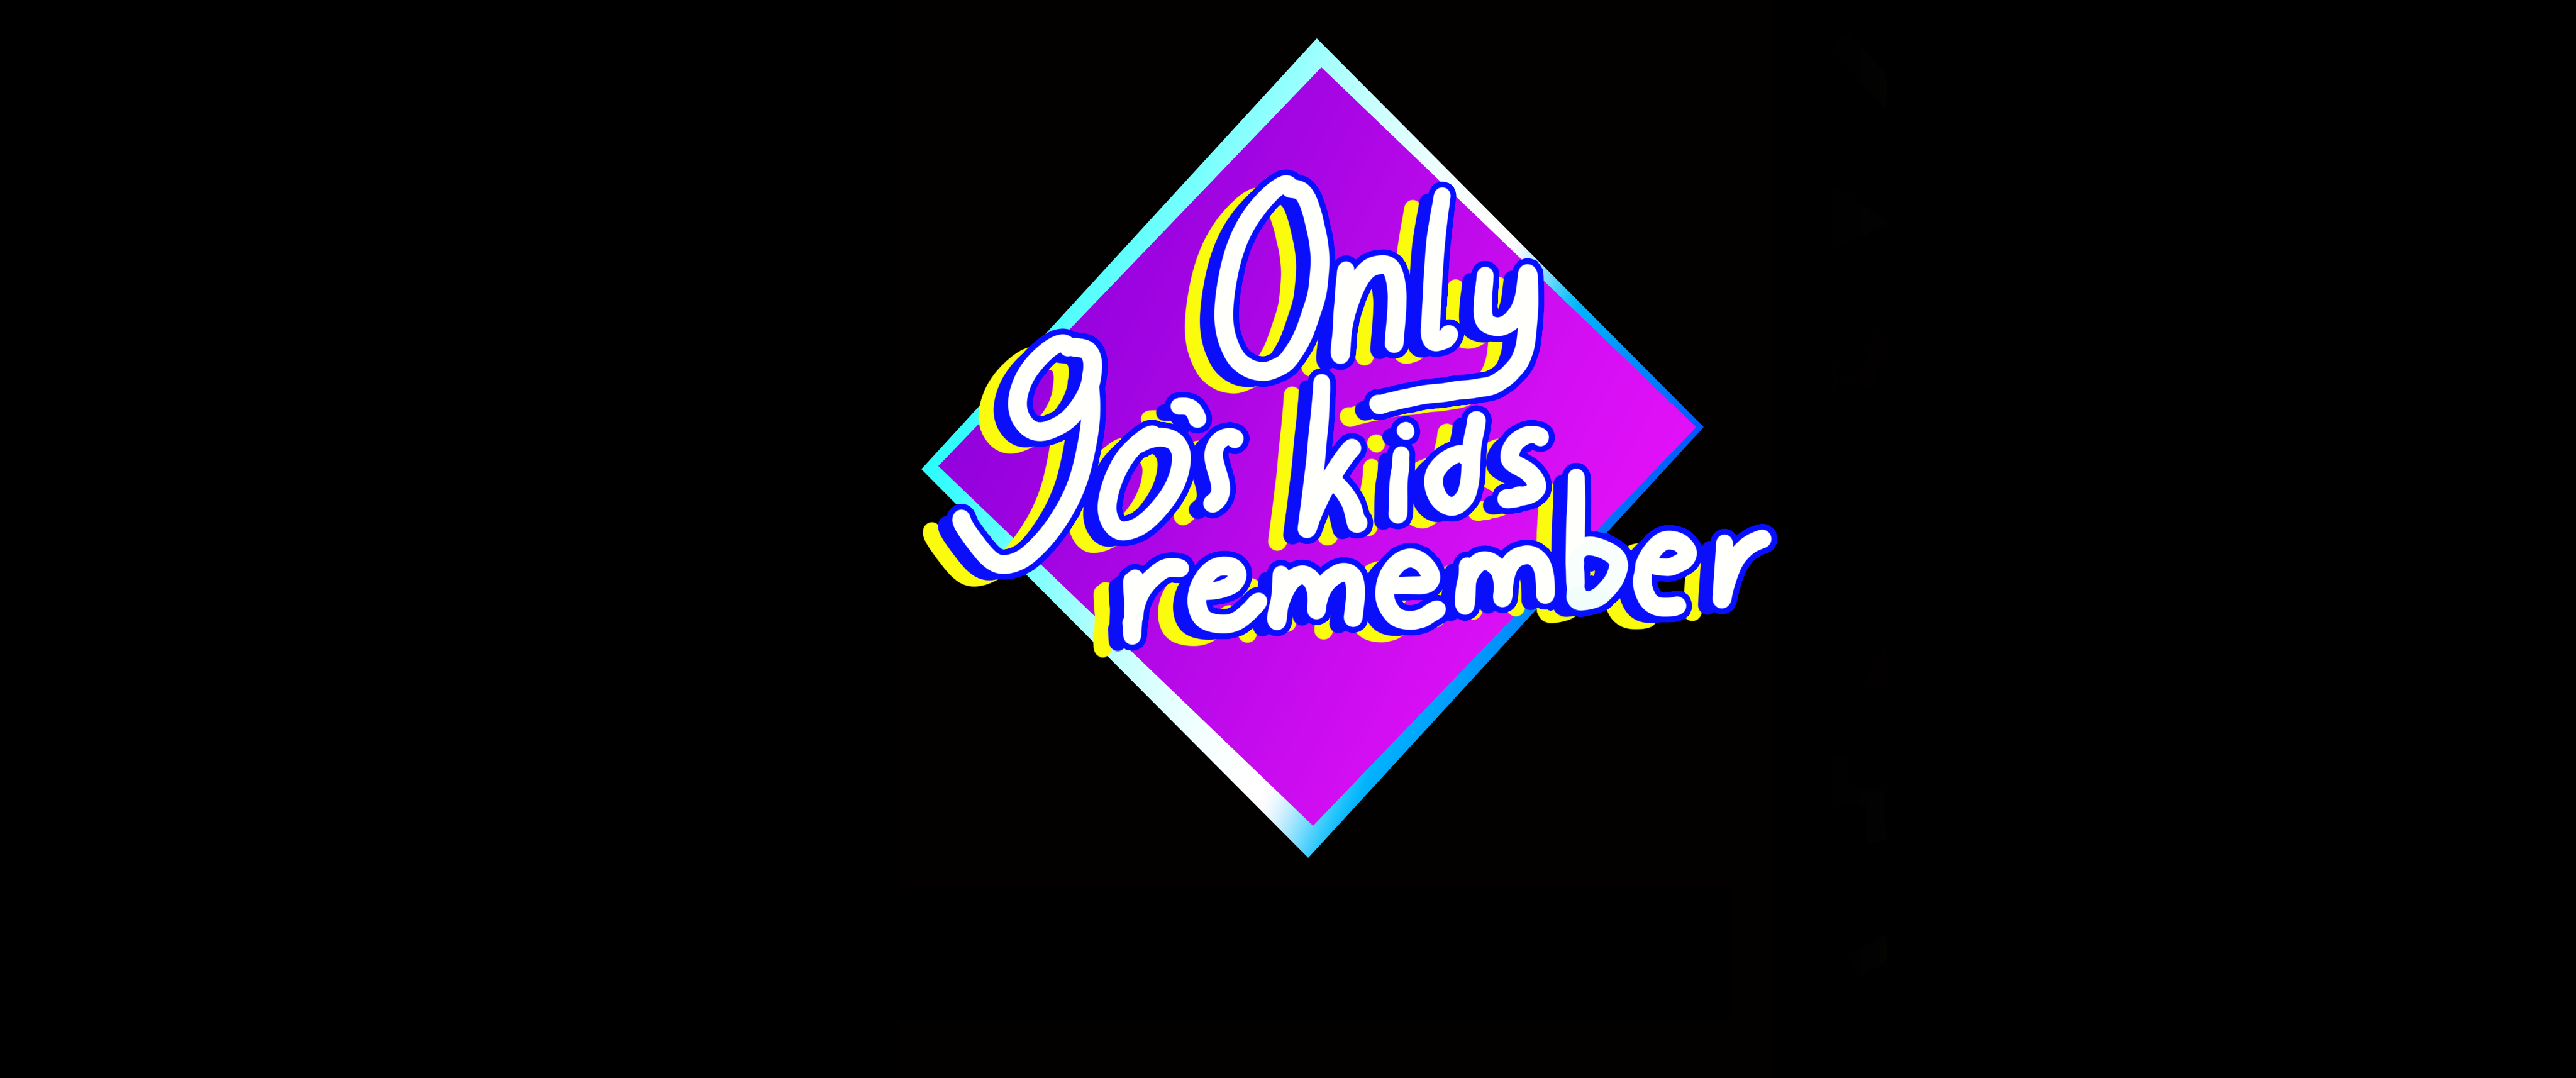 Only 90's Kids Remember